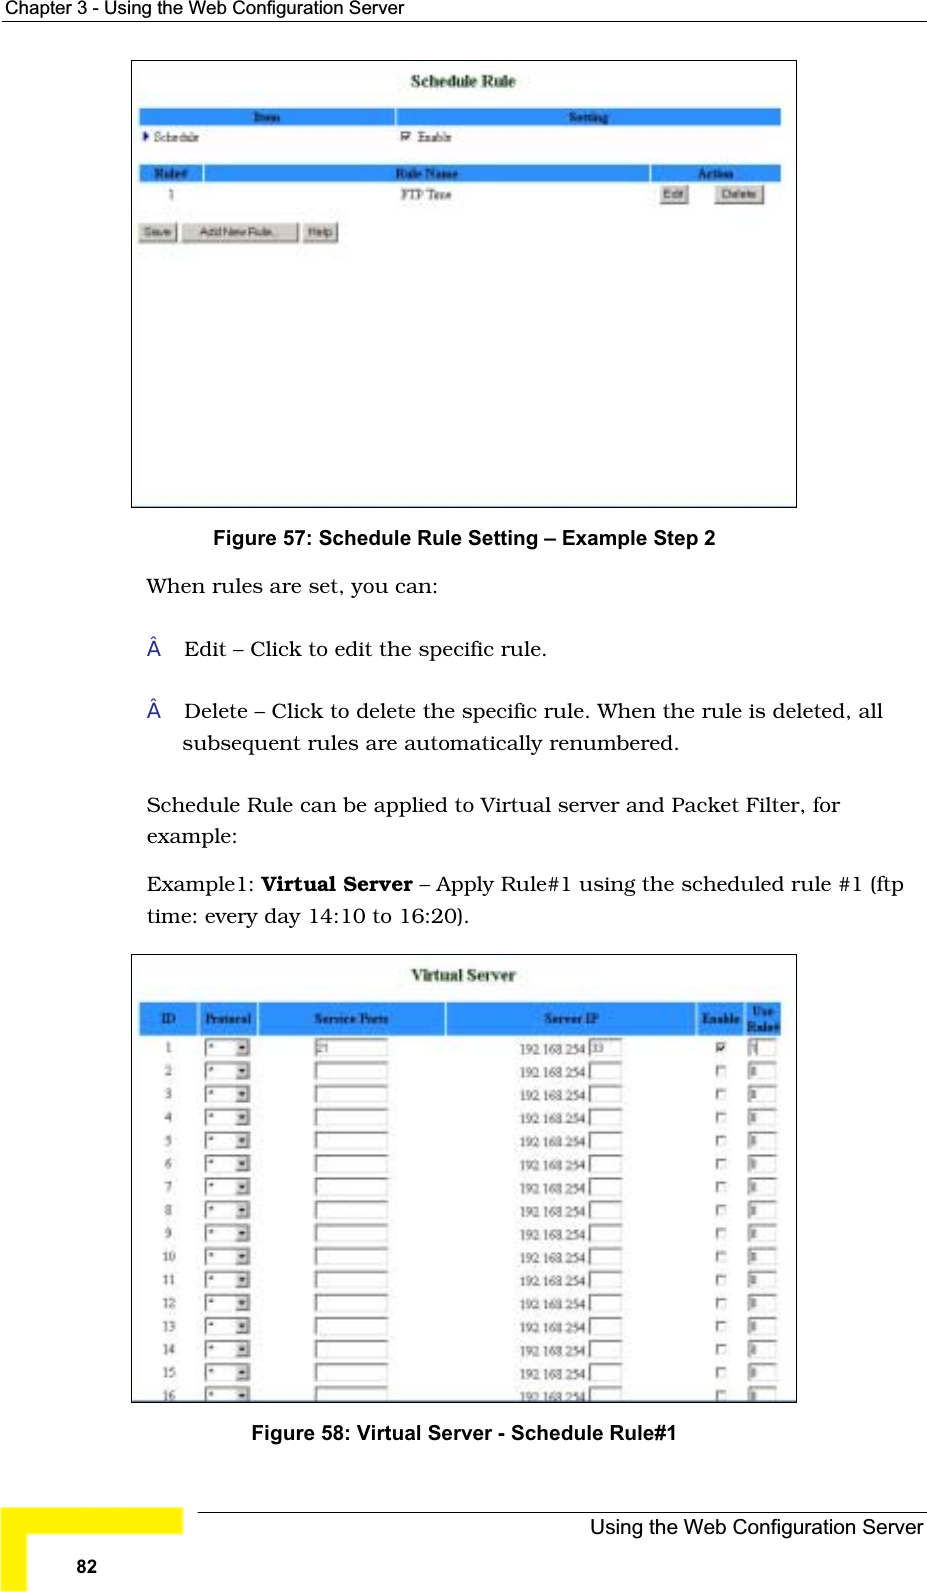 Chapter 3 - Using the Web Configuration ServerFigure 57: Schedule Rule Setting – Example Step 2 When rules are set, you can:Edit – Click to edit the specific rule.Delete – Click to delete the specific rule. When the rule is deleted, allsubsequent rules are automatically renumbered.Schedule Rule can be applied to Virtual server and Packet Filter, forexample:Example1: Virtual Server – Apply Rule#1 using the scheduled rule #1 (ftp time: every day 14:10 to 16:20).Figure 58: Virtual Server - Schedule Rule#1Using the Web Configuration Server82